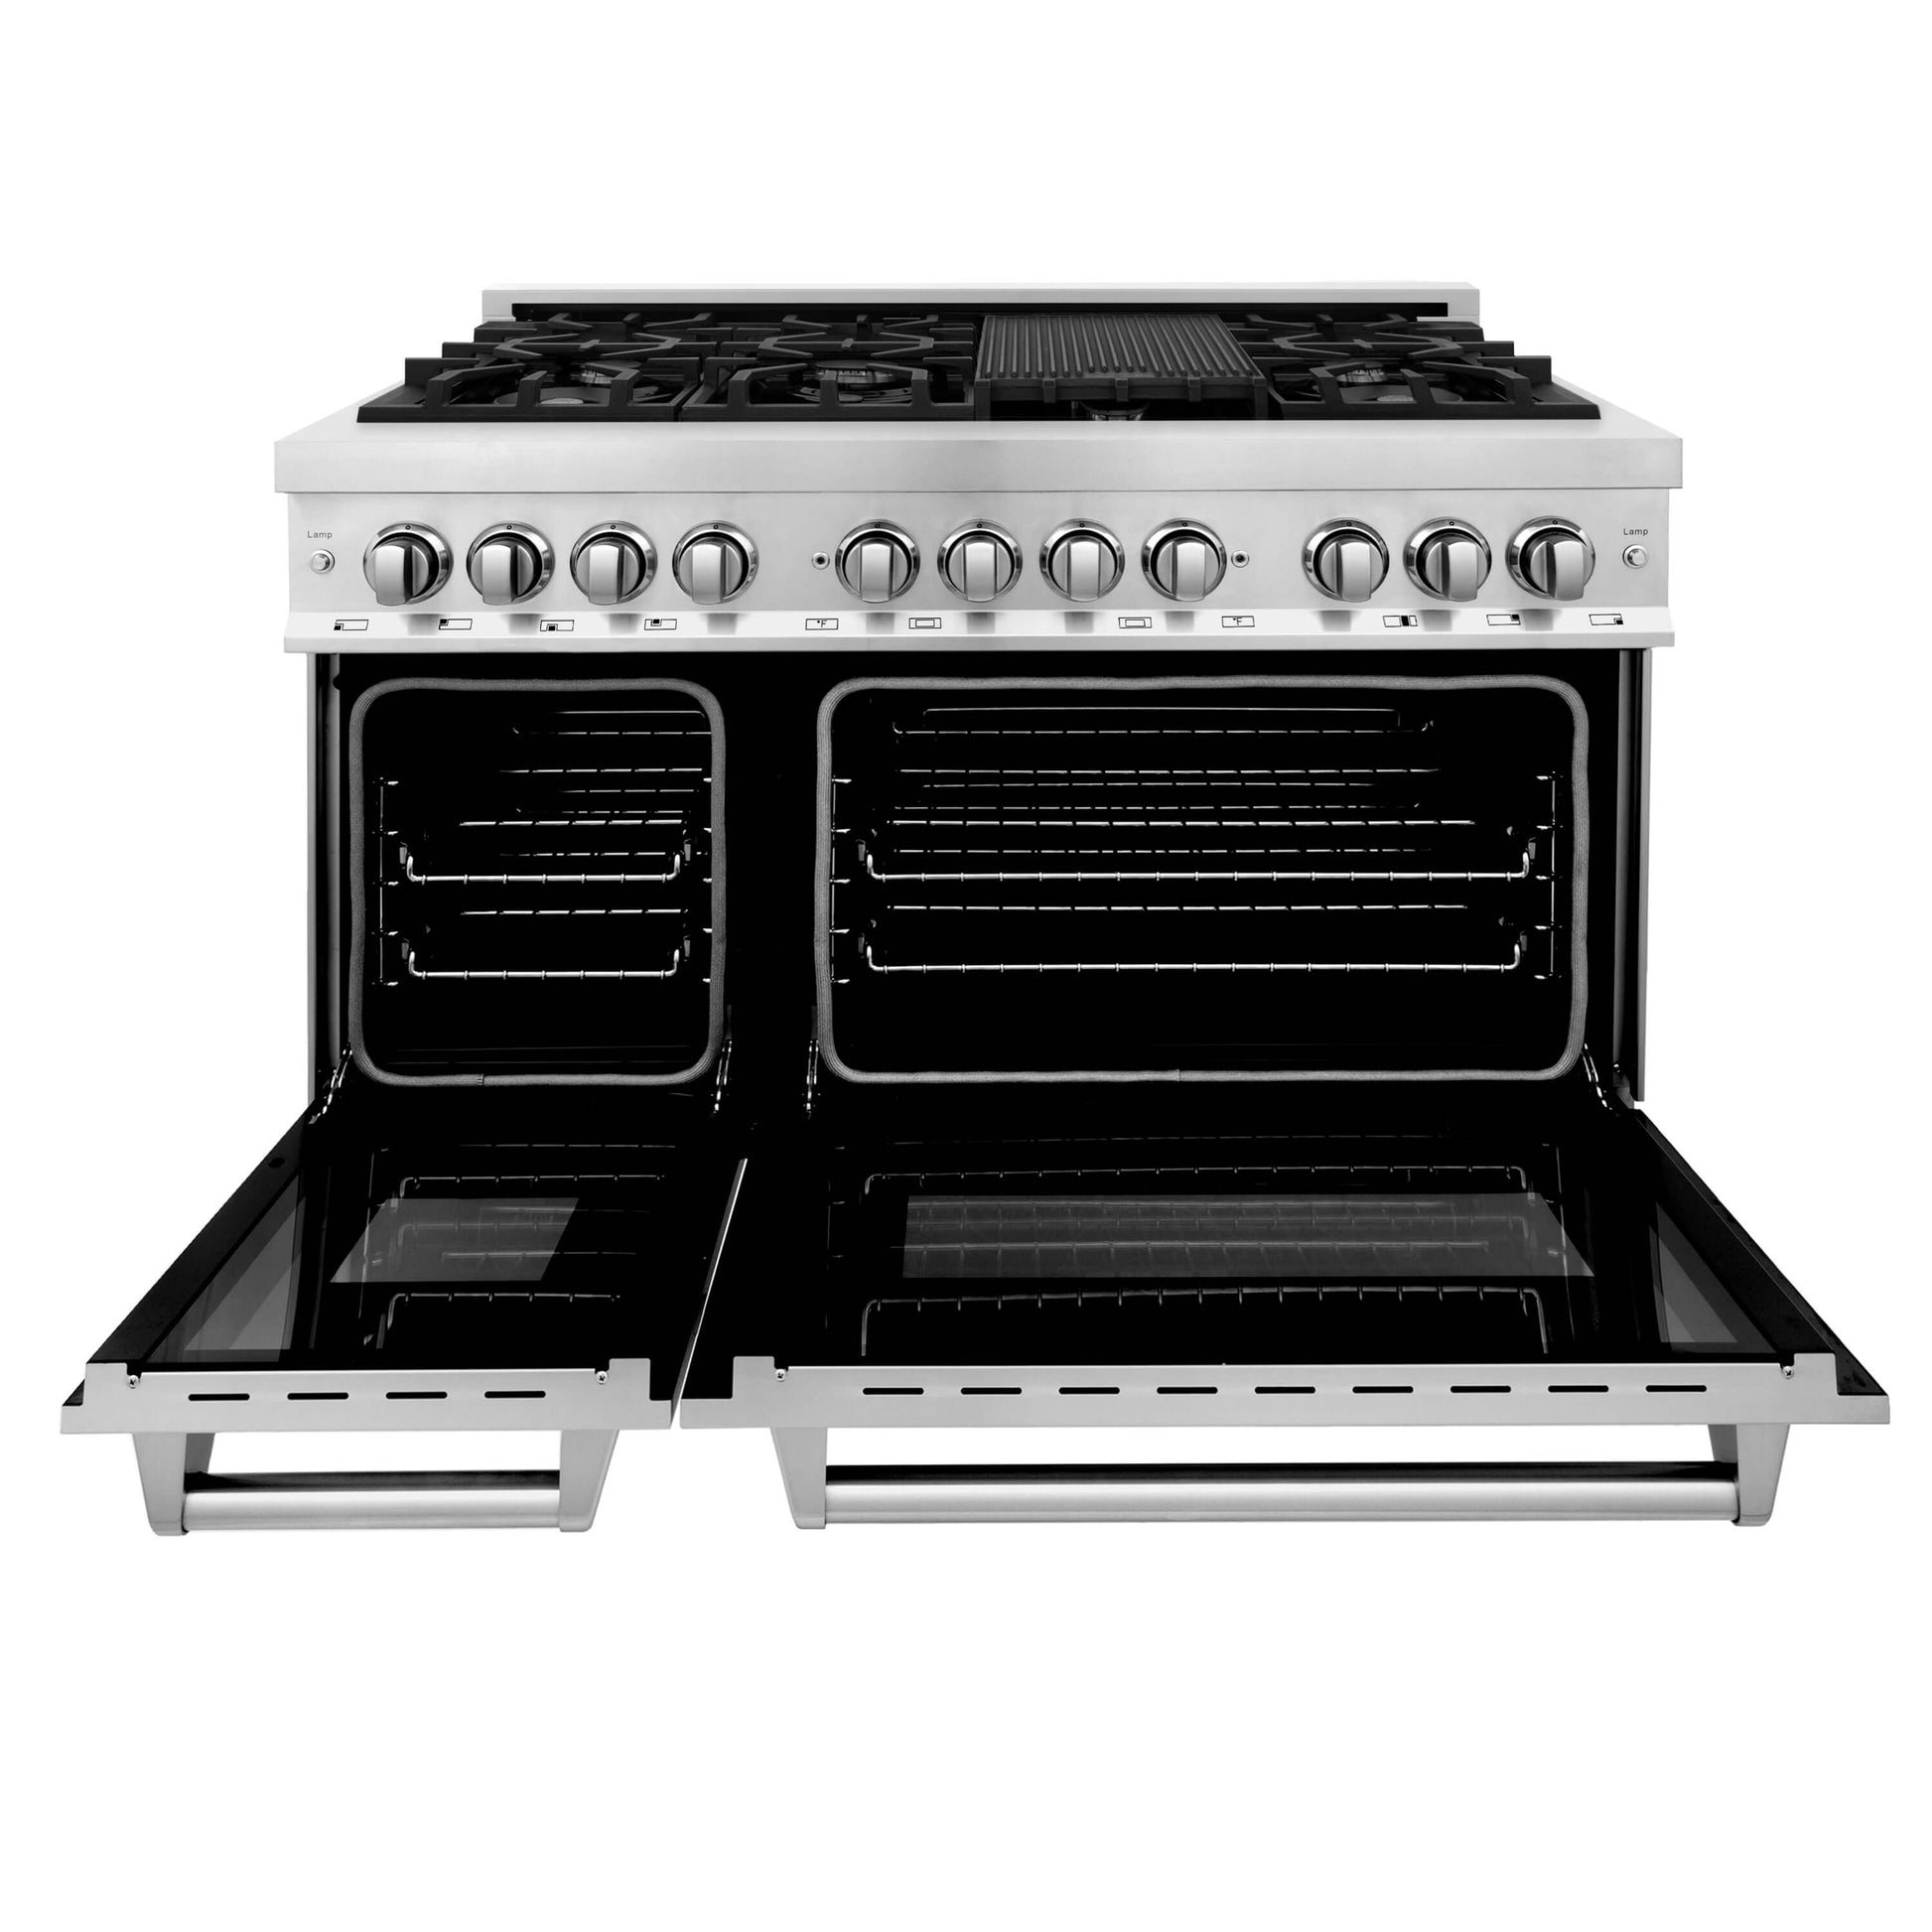 ZLINE 3-Appliance 48" Kitchen Package with Stainless Steel Dual Fuel Range, Convertible Vent Range Hood, and Dishwasher